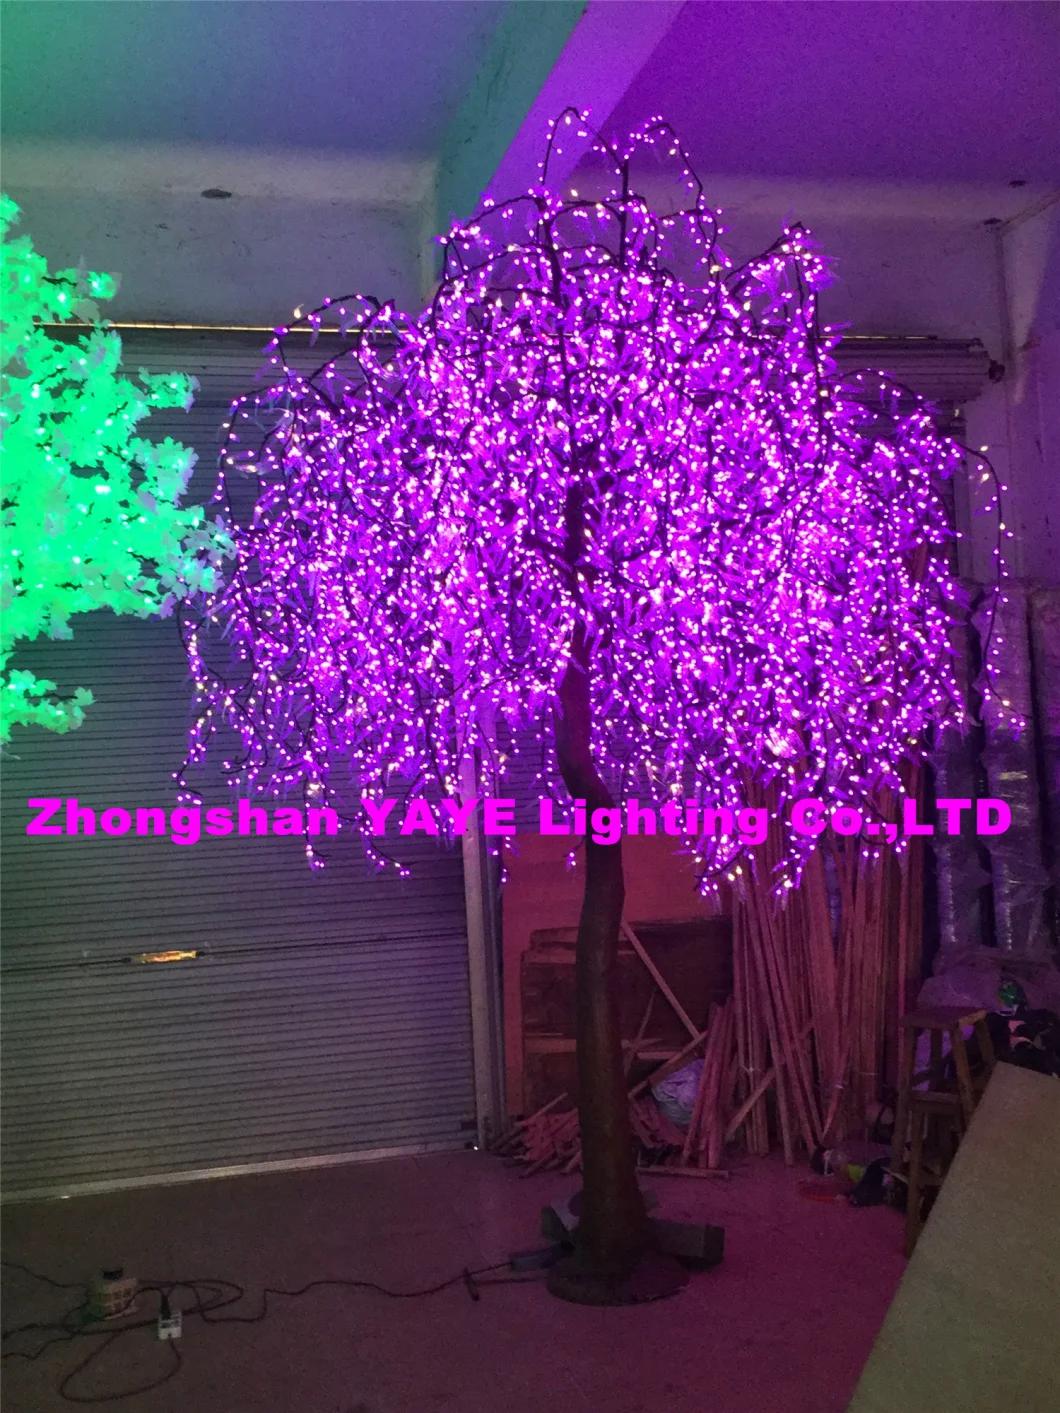 Yaye 2021 Hot Sell Diameter 3m/Height 3.5m RGB LED Christmas Willow Tree with 5376LEDs/ 2 Years Warranty